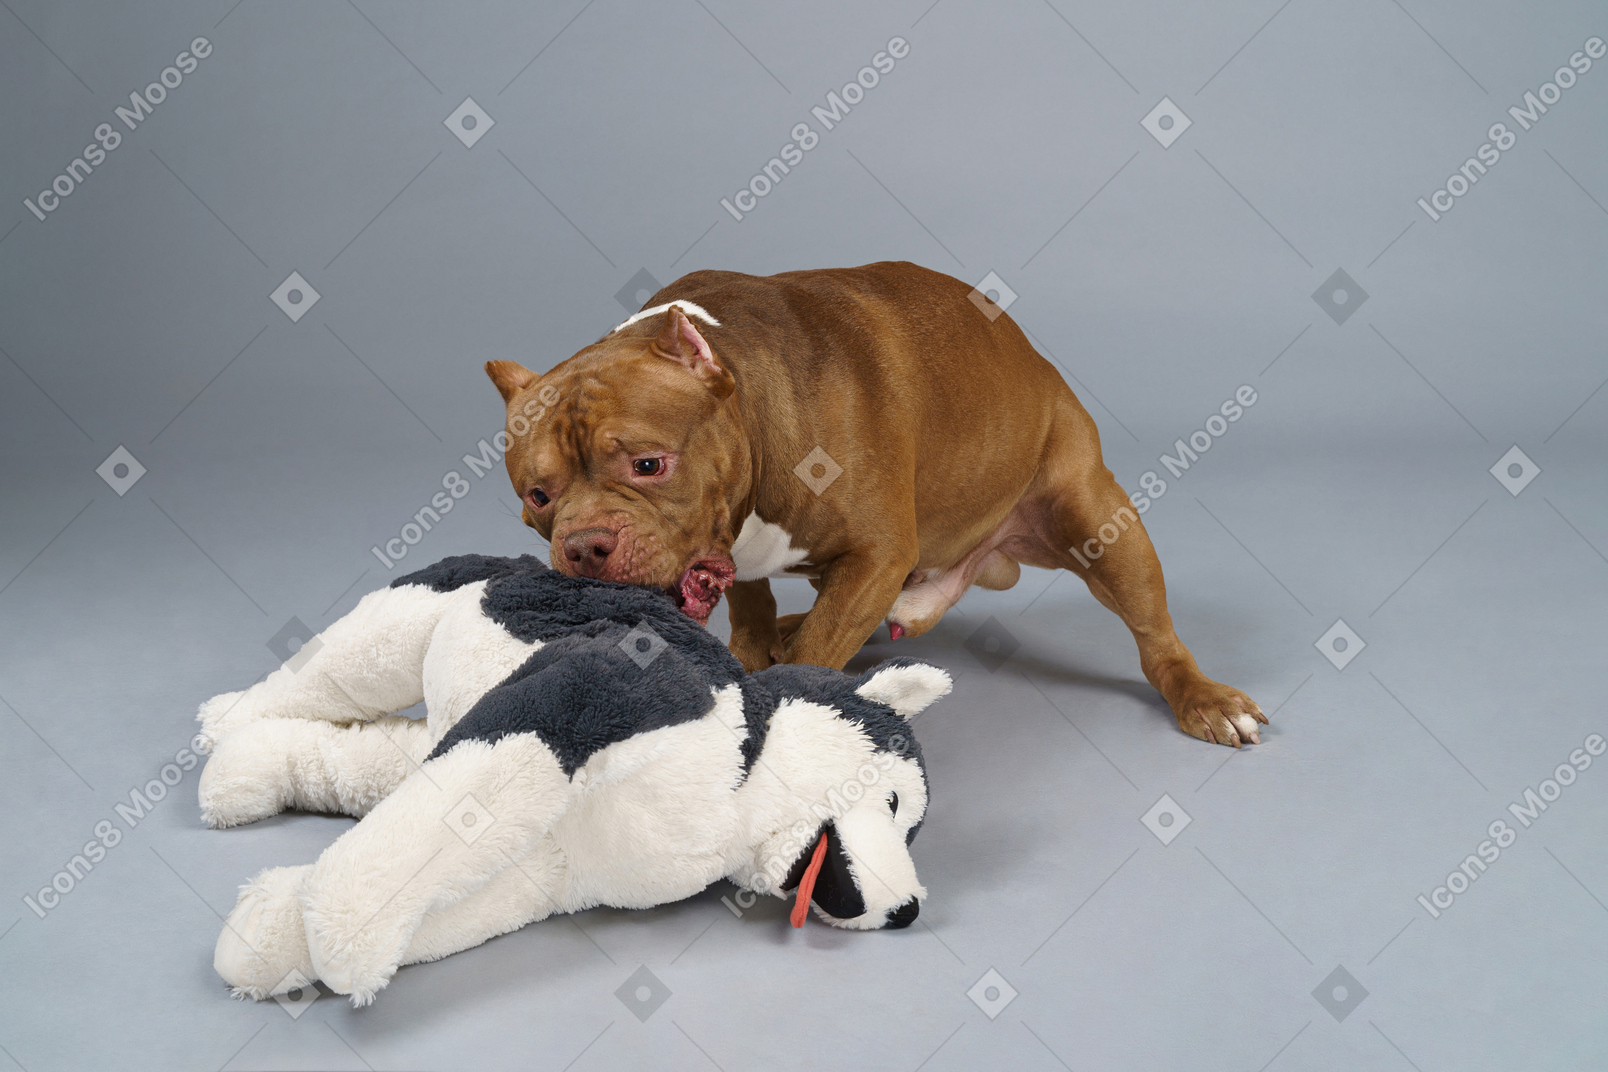 Full-length of a brown bulldog playing with a fluffy dog toy